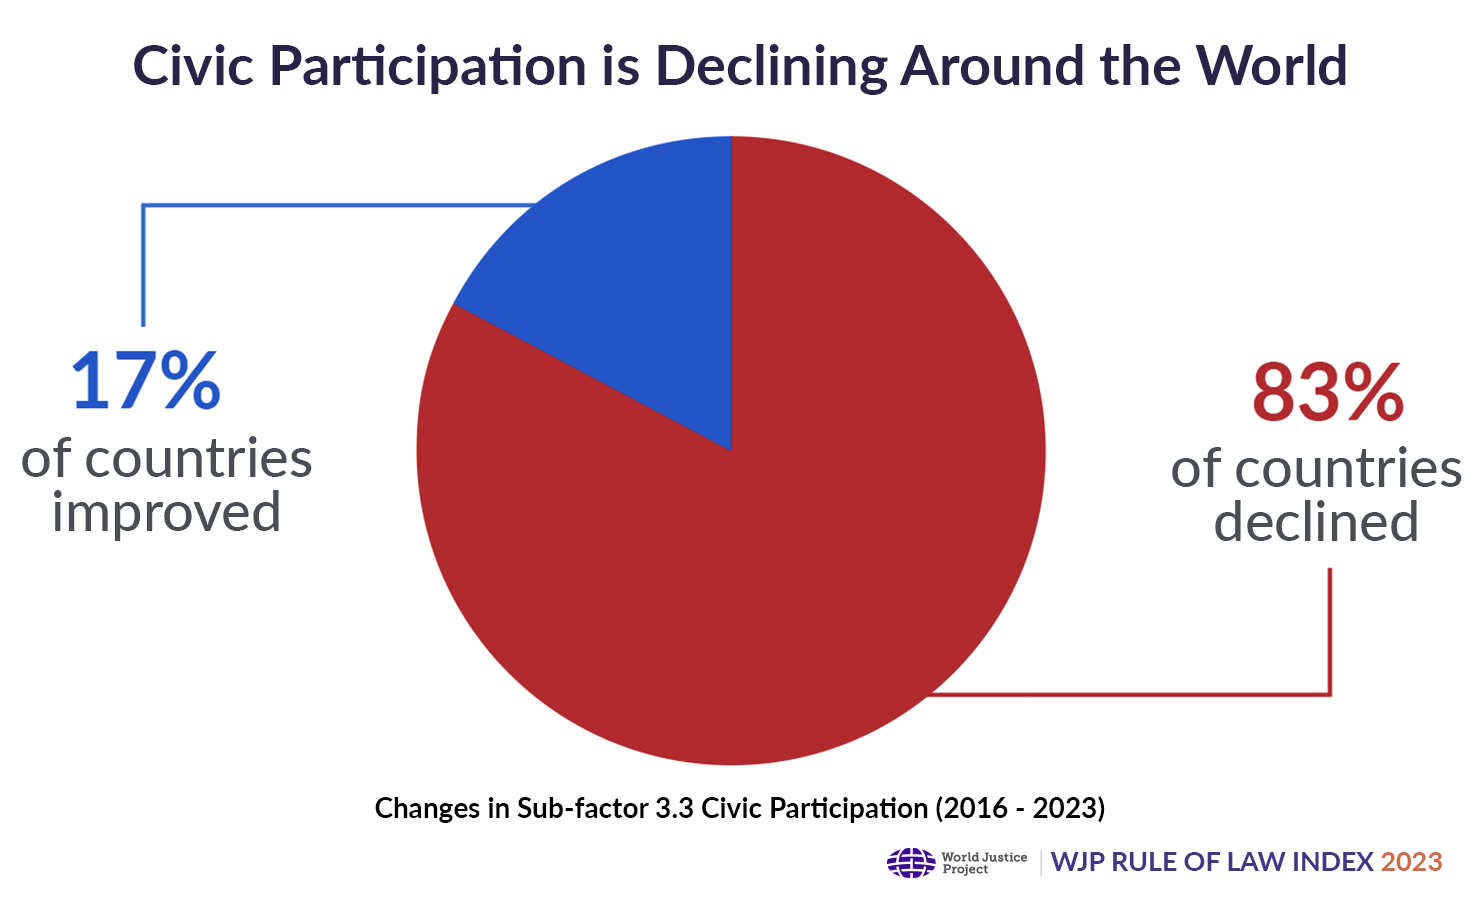 Civic participation declined in 83% of countries in the Index from 2016-2023